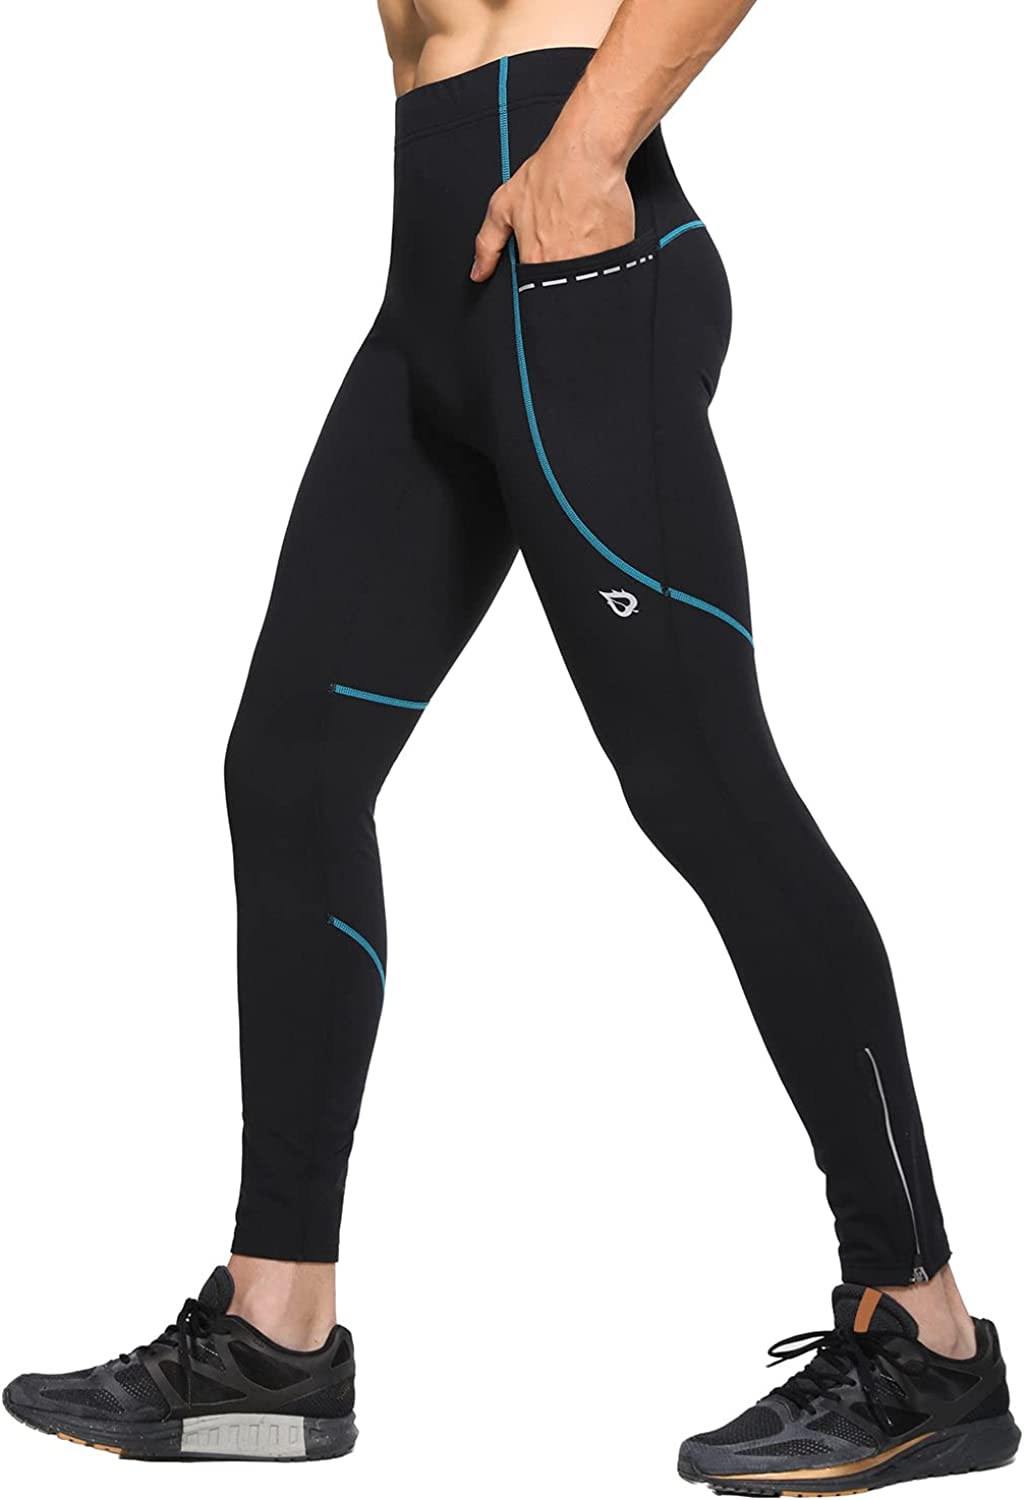 Men's Compression Tights, Cold Weather